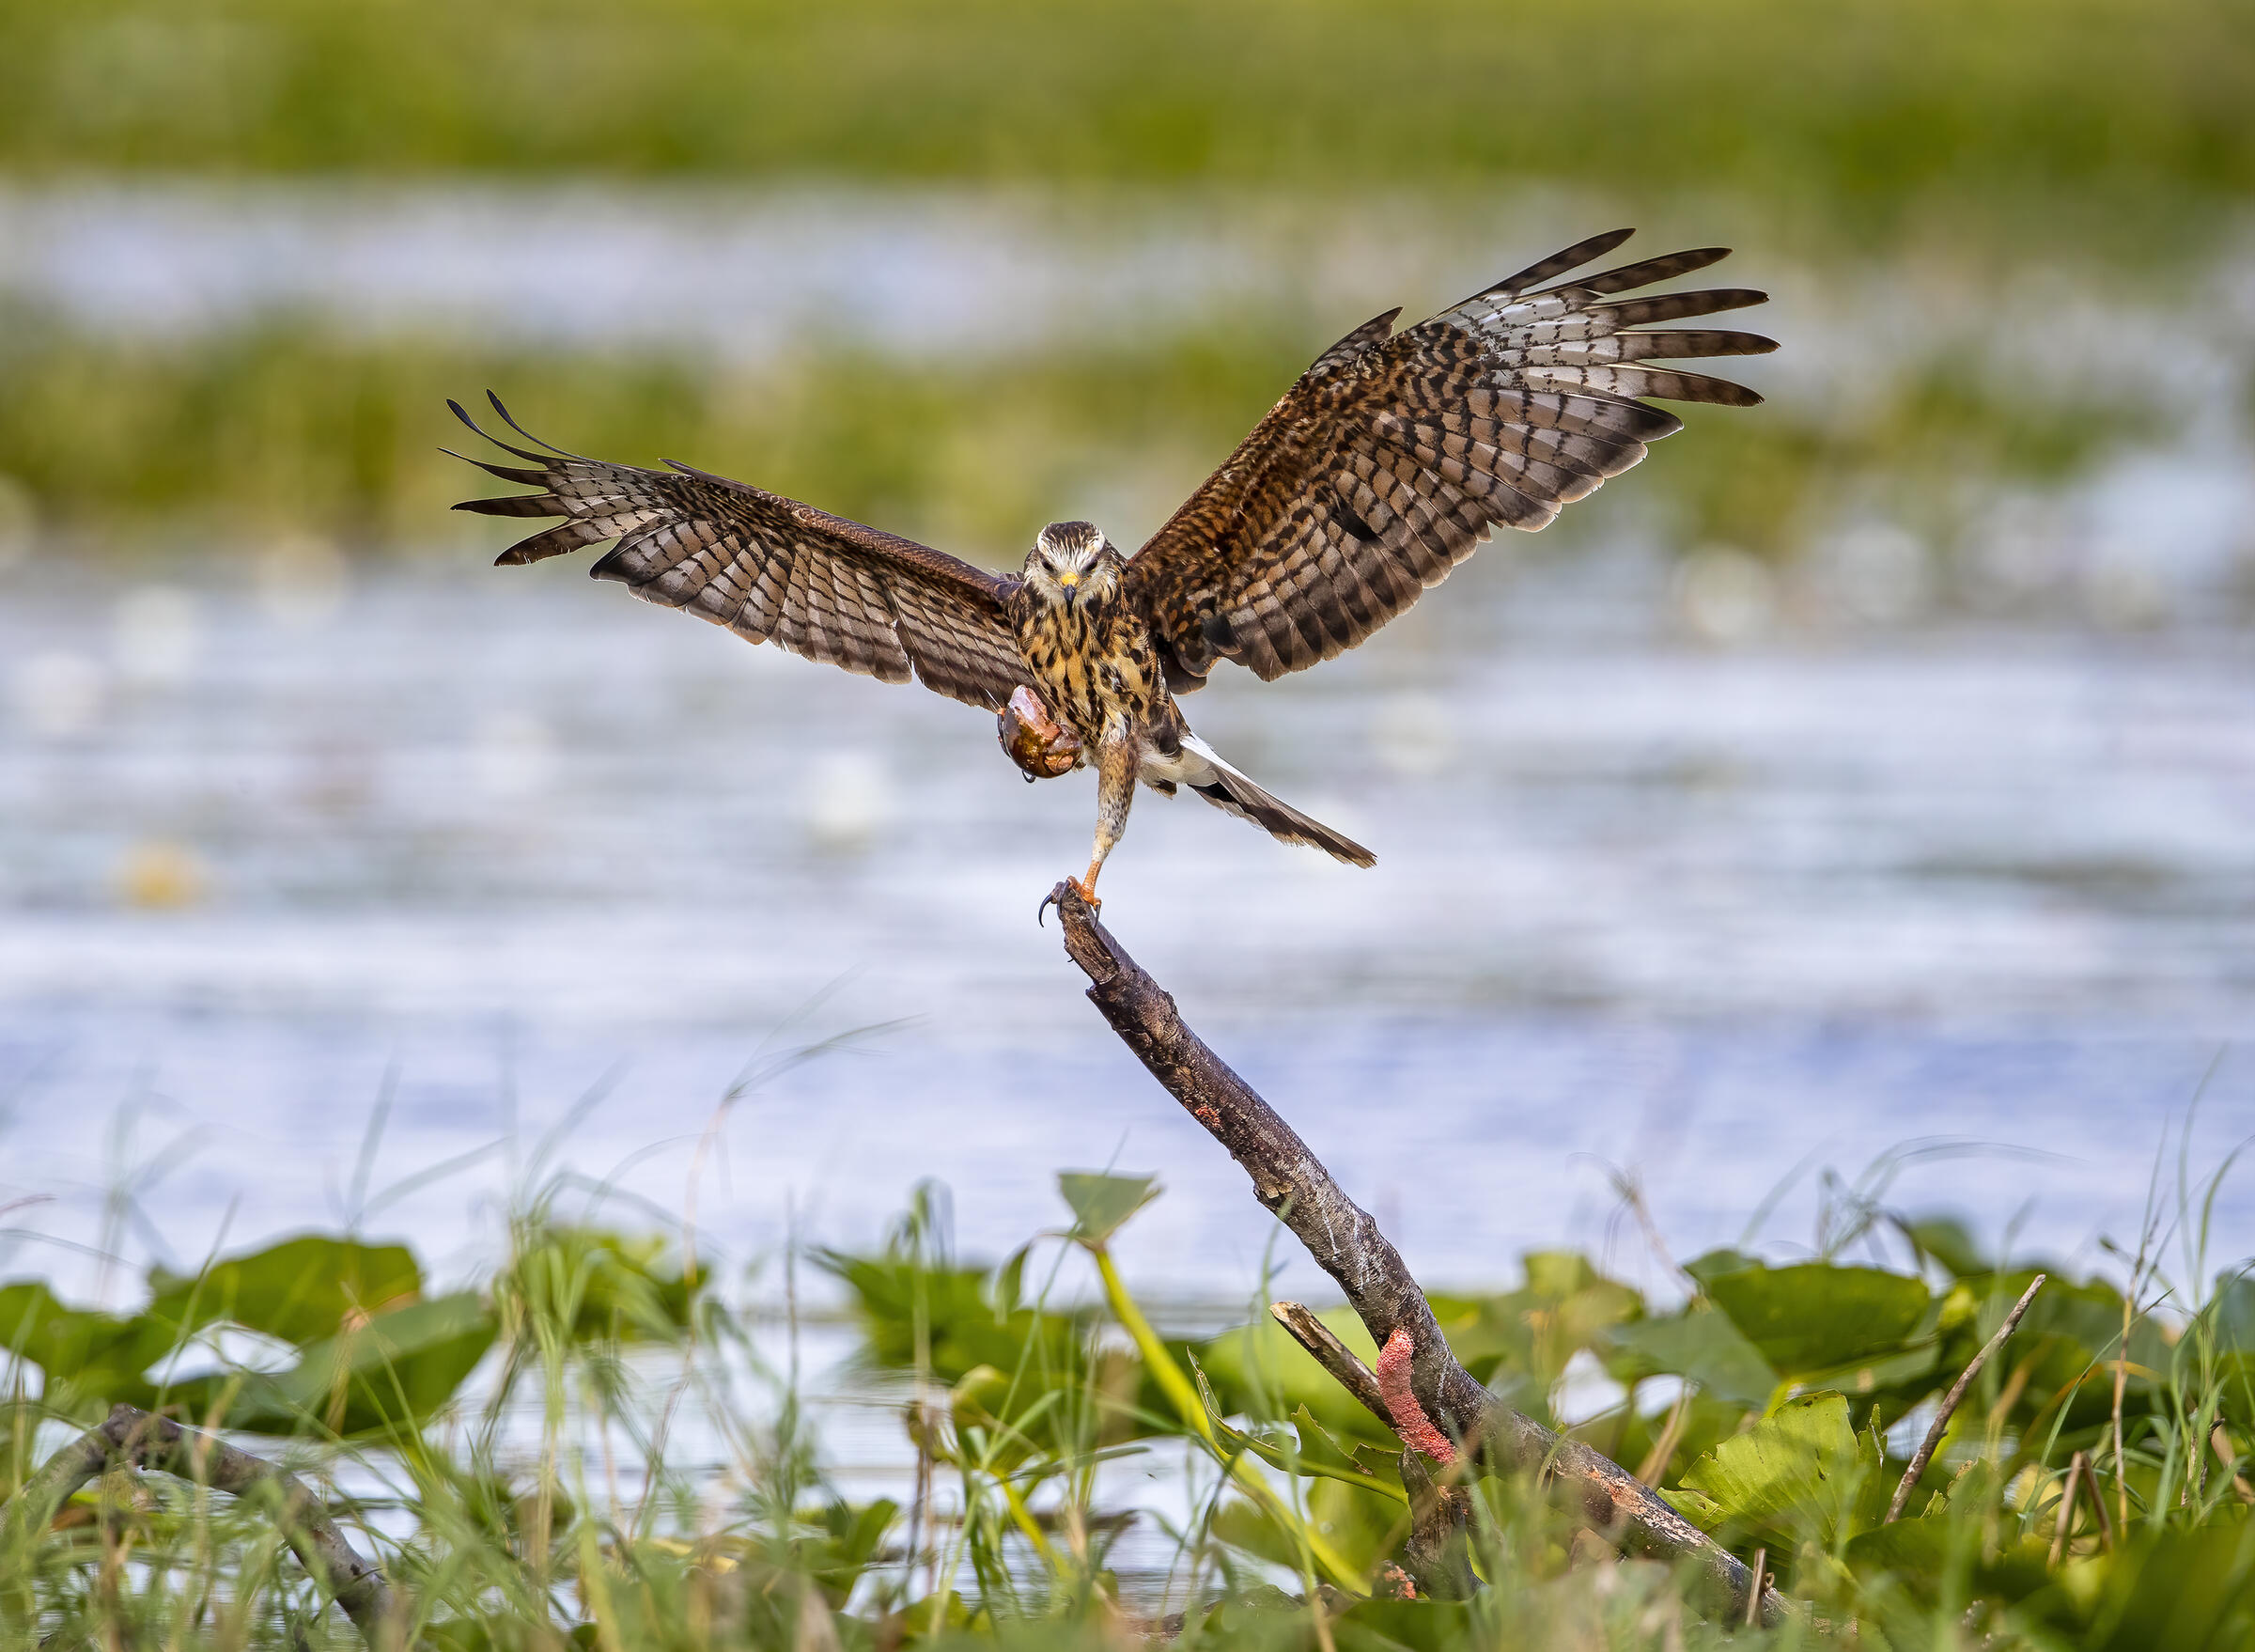 A female Snail Kite with wings outstretched over water.